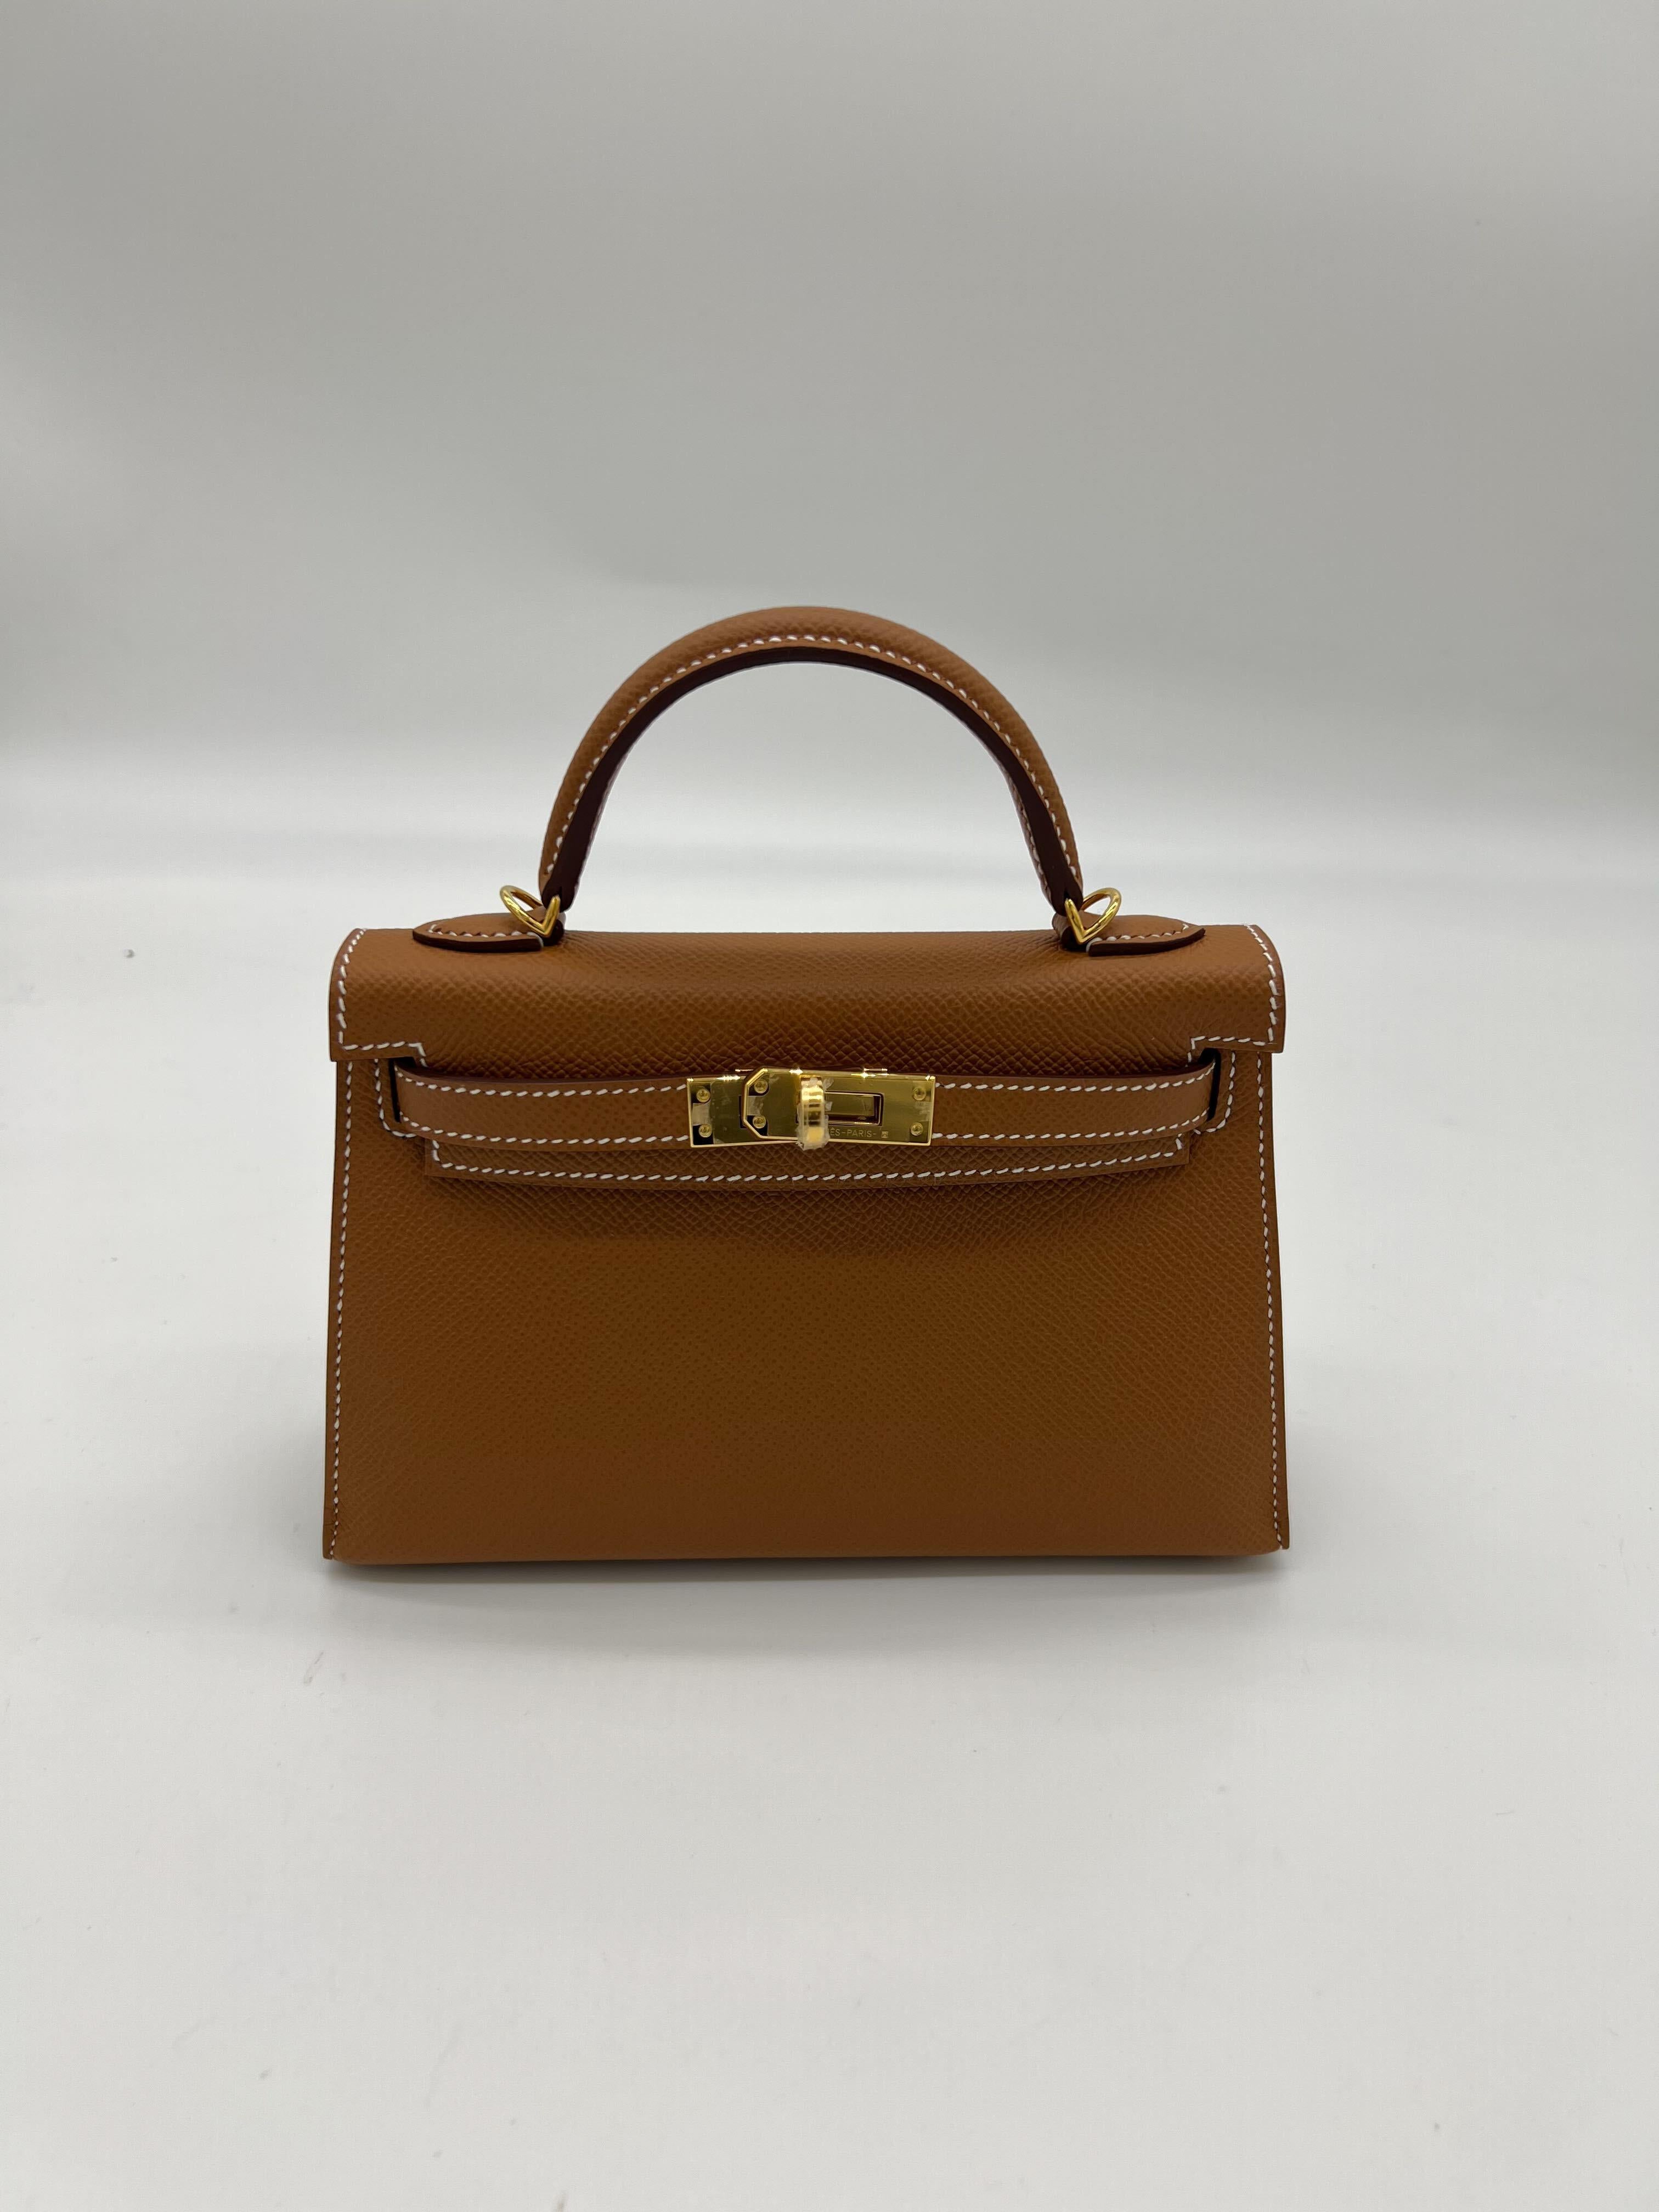 Hermes Kelly II Sellier 20 Mini Gold Epsom Calfskin Leather, Gold Hardware

Condition & Year: New 2022
Material: Epsom Calfskin Leather
Measurements: 20cm x 16cm x 10cm
Hardware: Gold

*Comes with full original packaging.
*Full plastic on hardware.